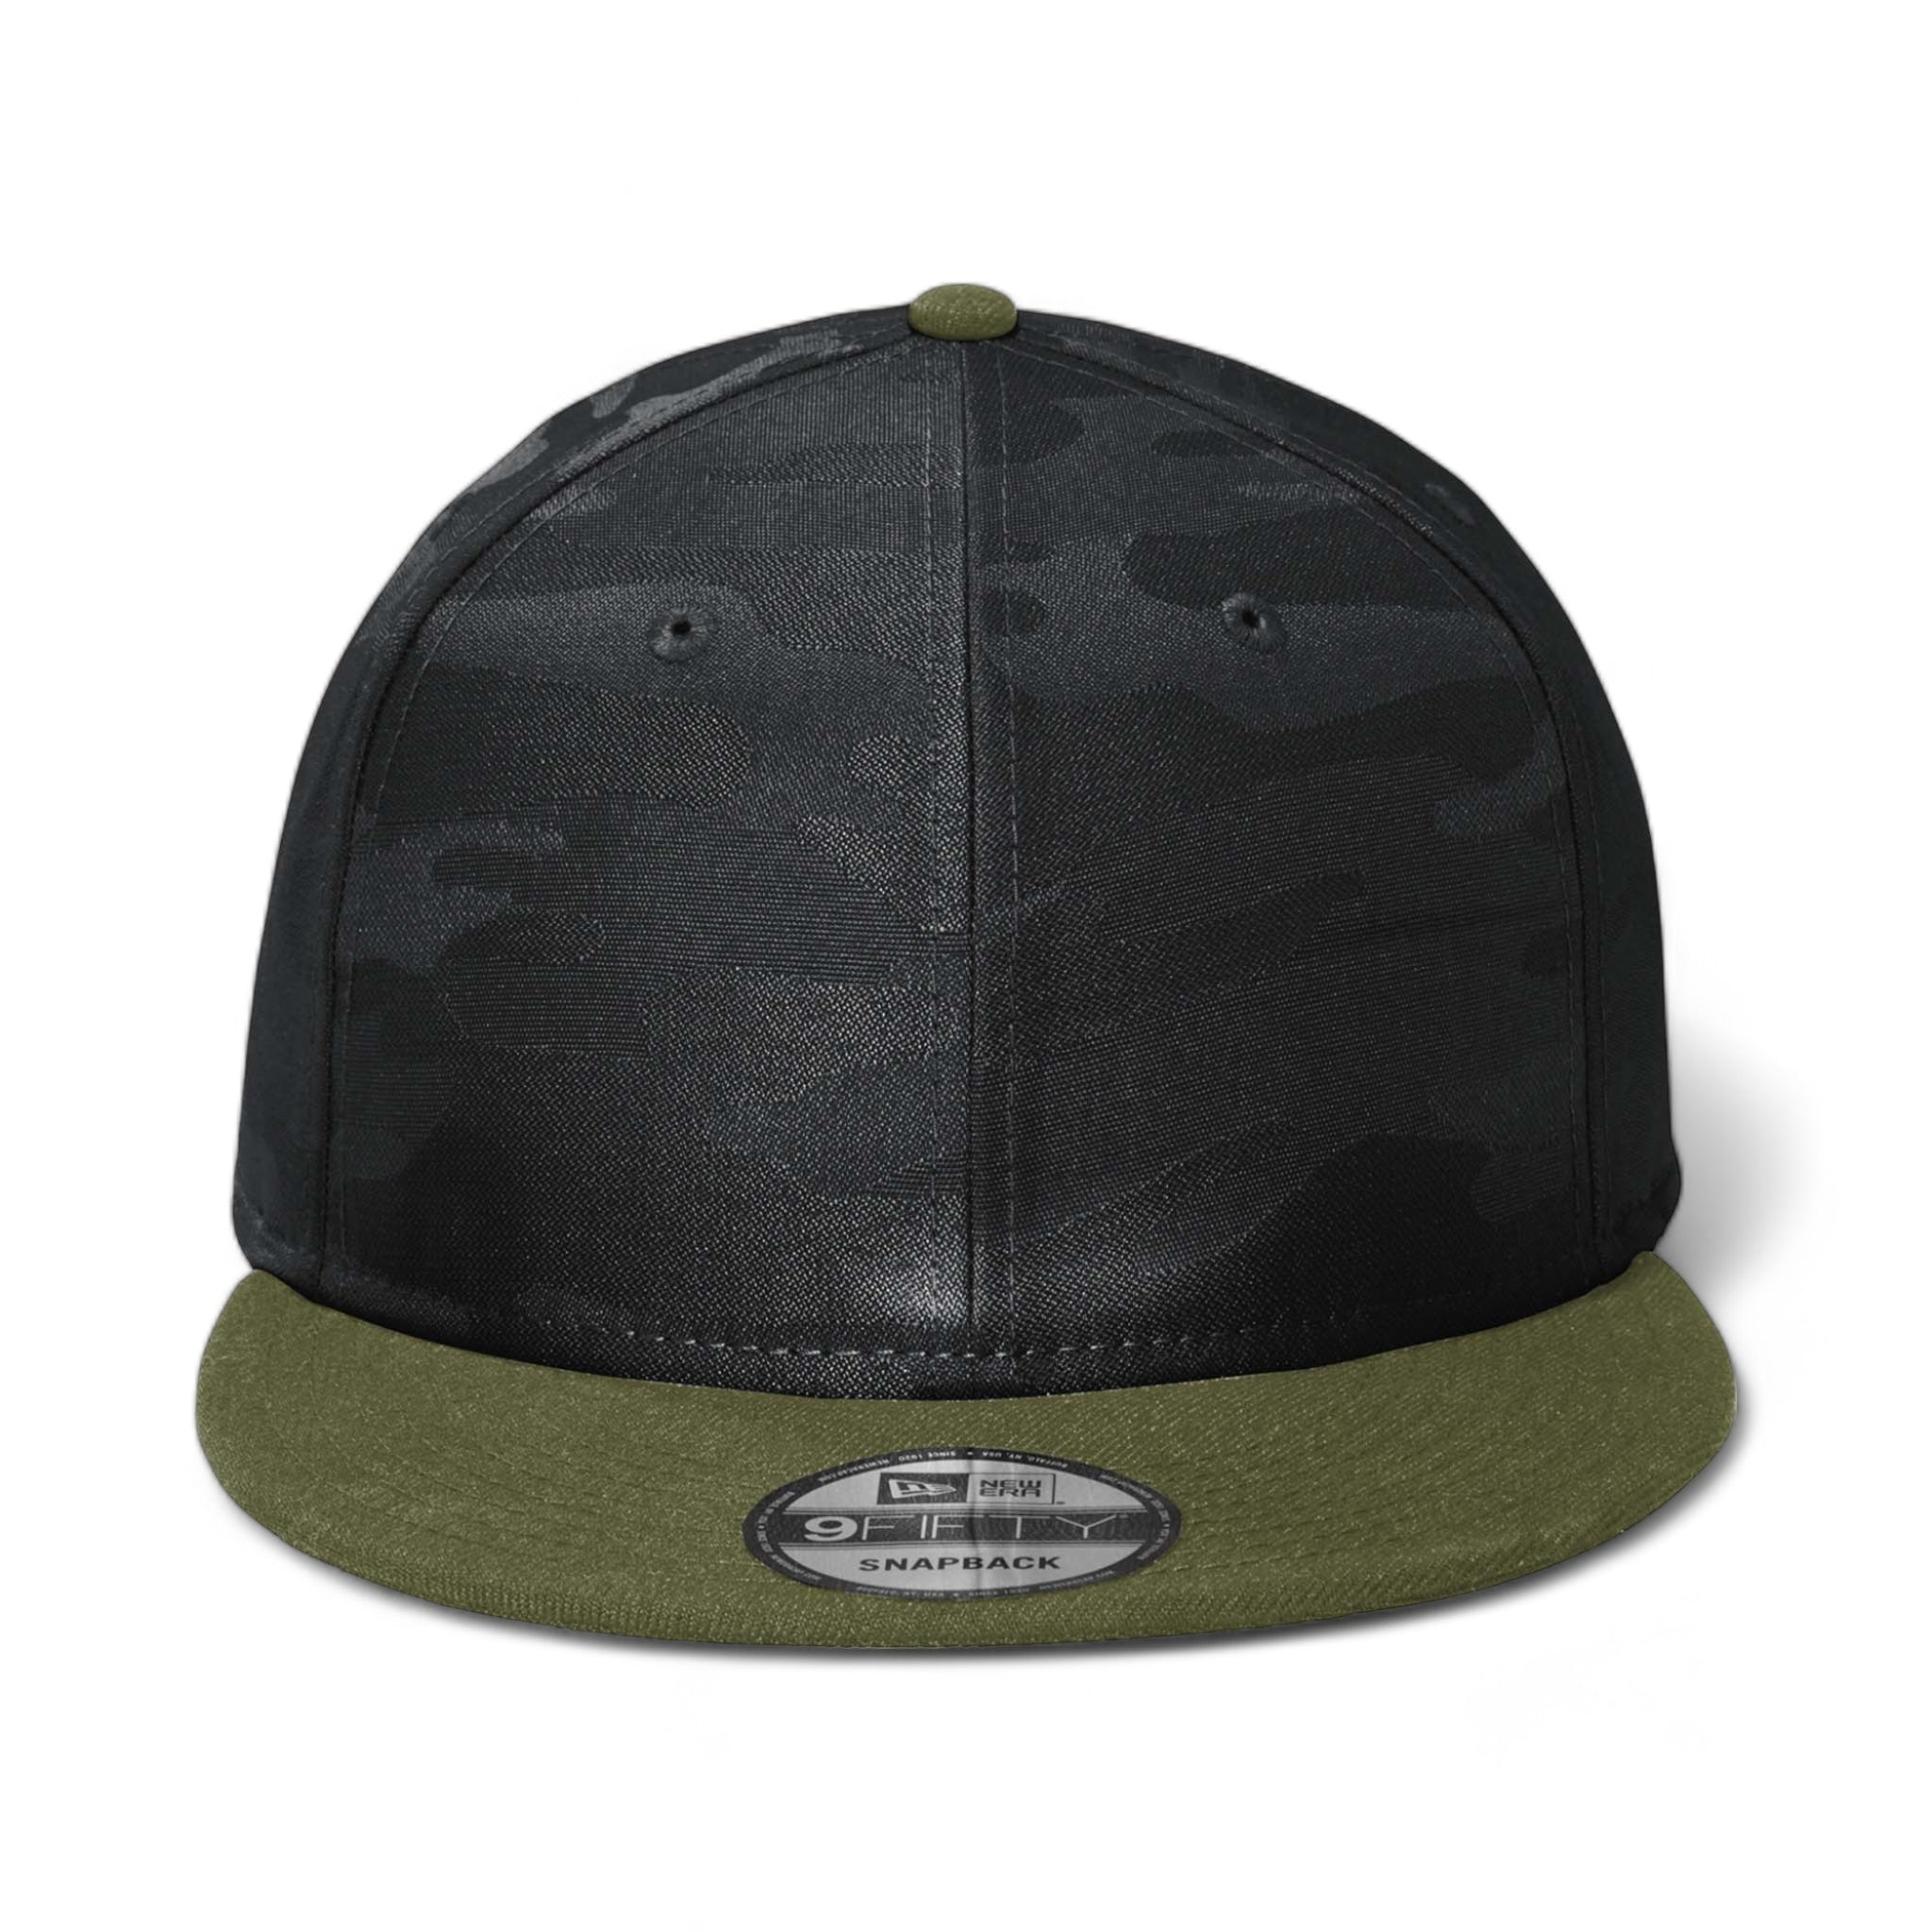 Front view of New Era NE407 custom hat in army and black camo